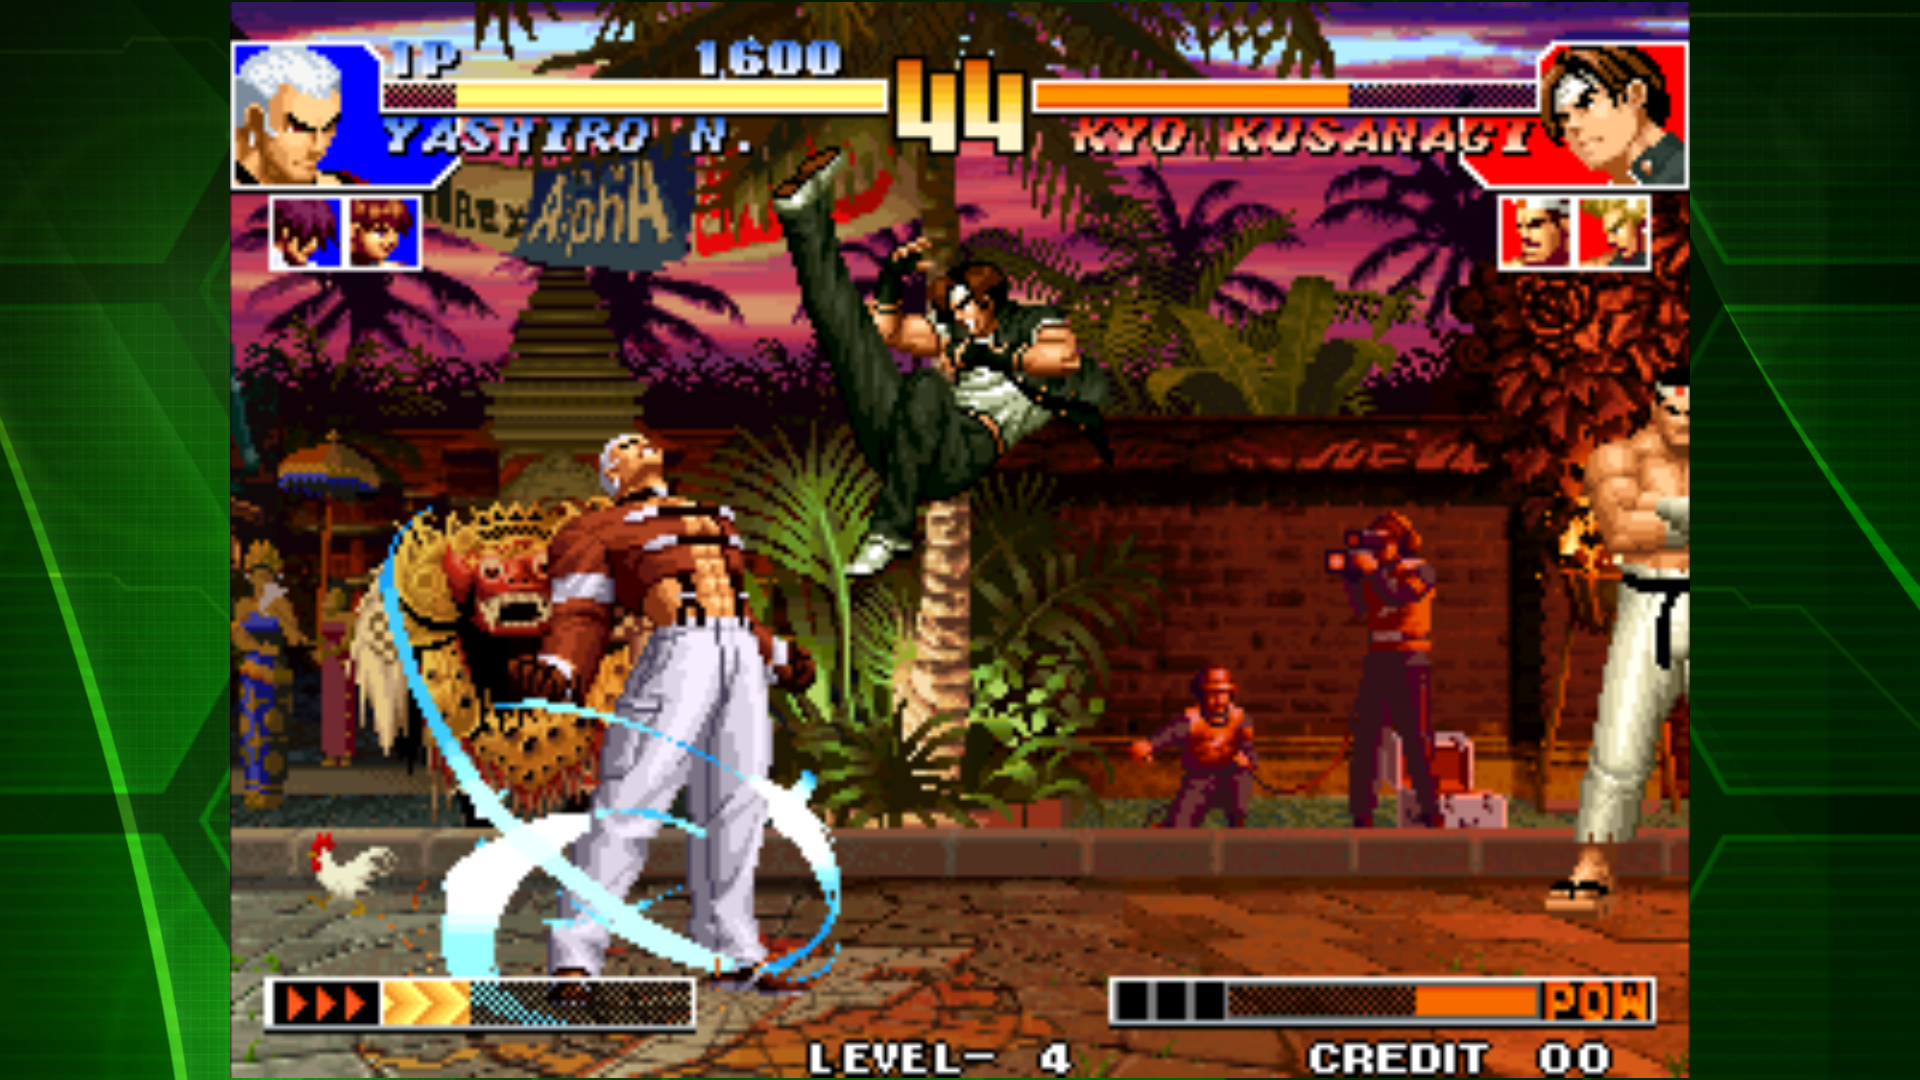 Free Arcade3 KOF 97 APK Download For Android